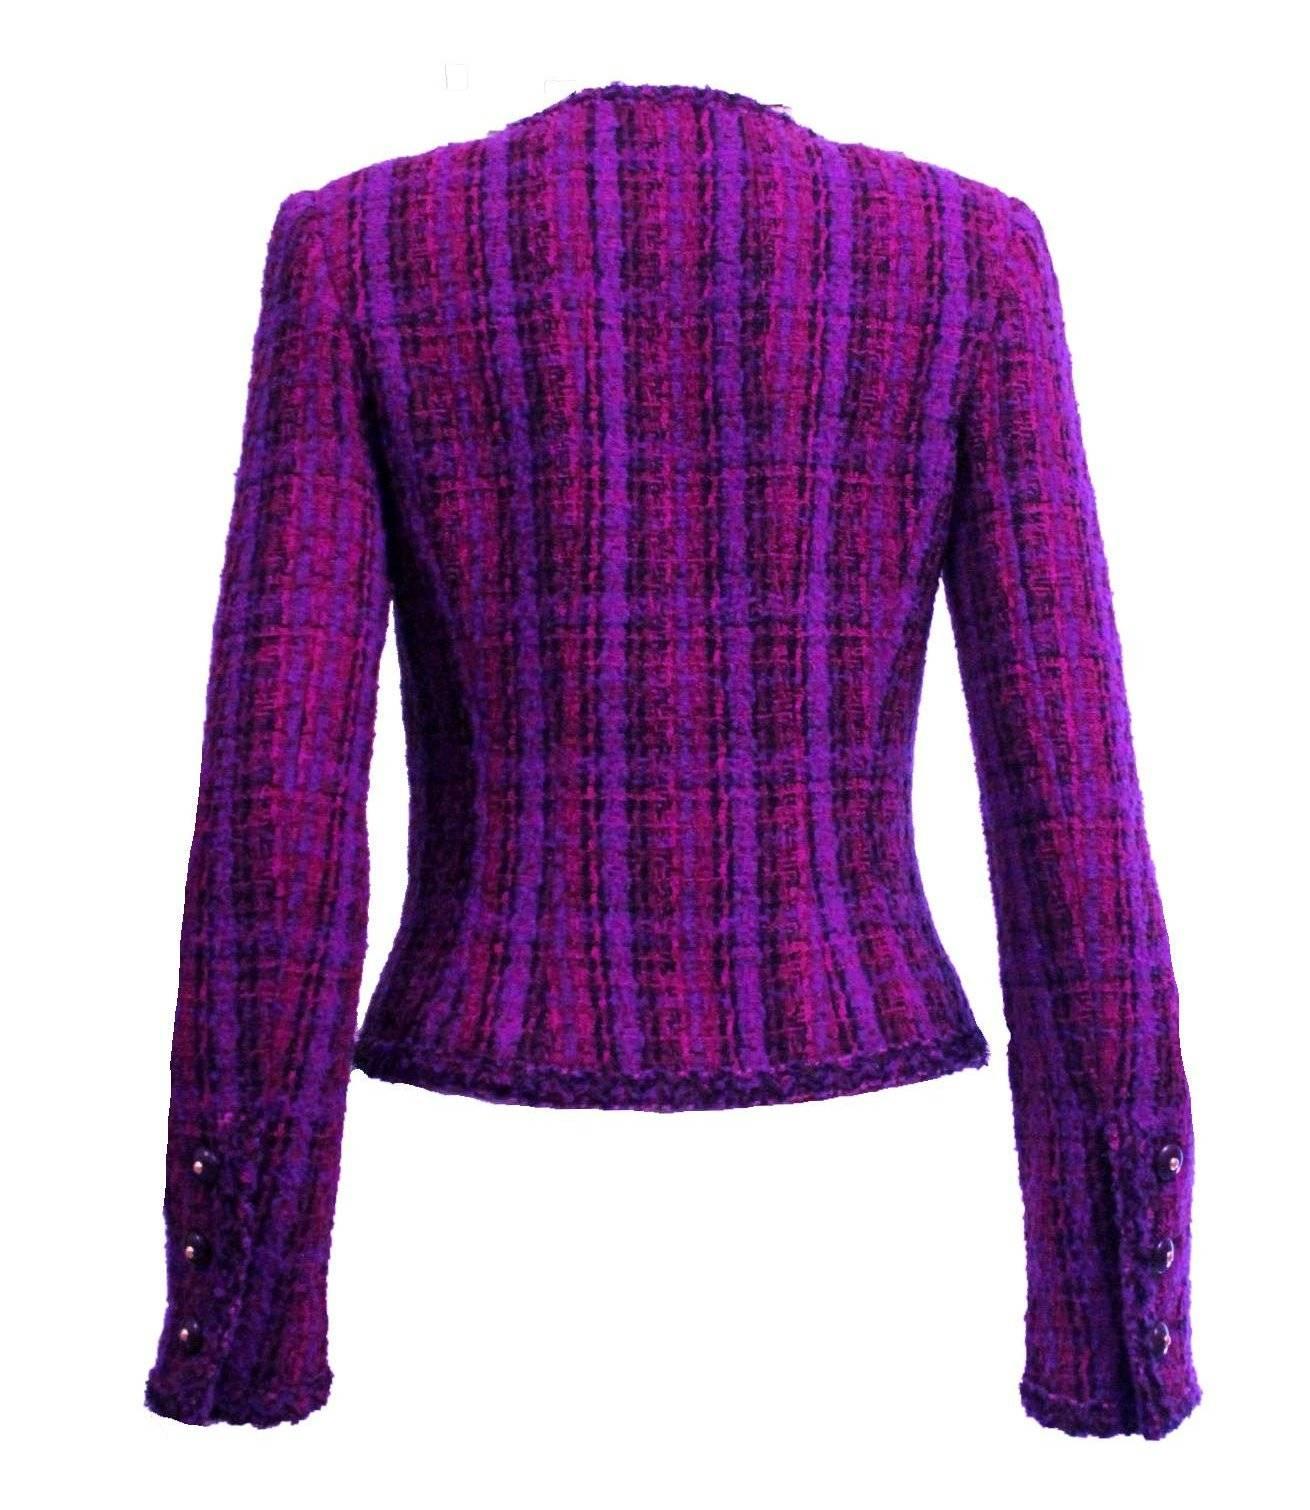 A stunning Chanel Tweed Jacket
Beautiful pink & purple tweed fabric
Crochet knit trimming
Fringed hems
Front pockets
Fitted style
CC logo buttons
Fully lined with purple CC logo silk
Chain at hem for a perfect fit
Made in France
Size 36
